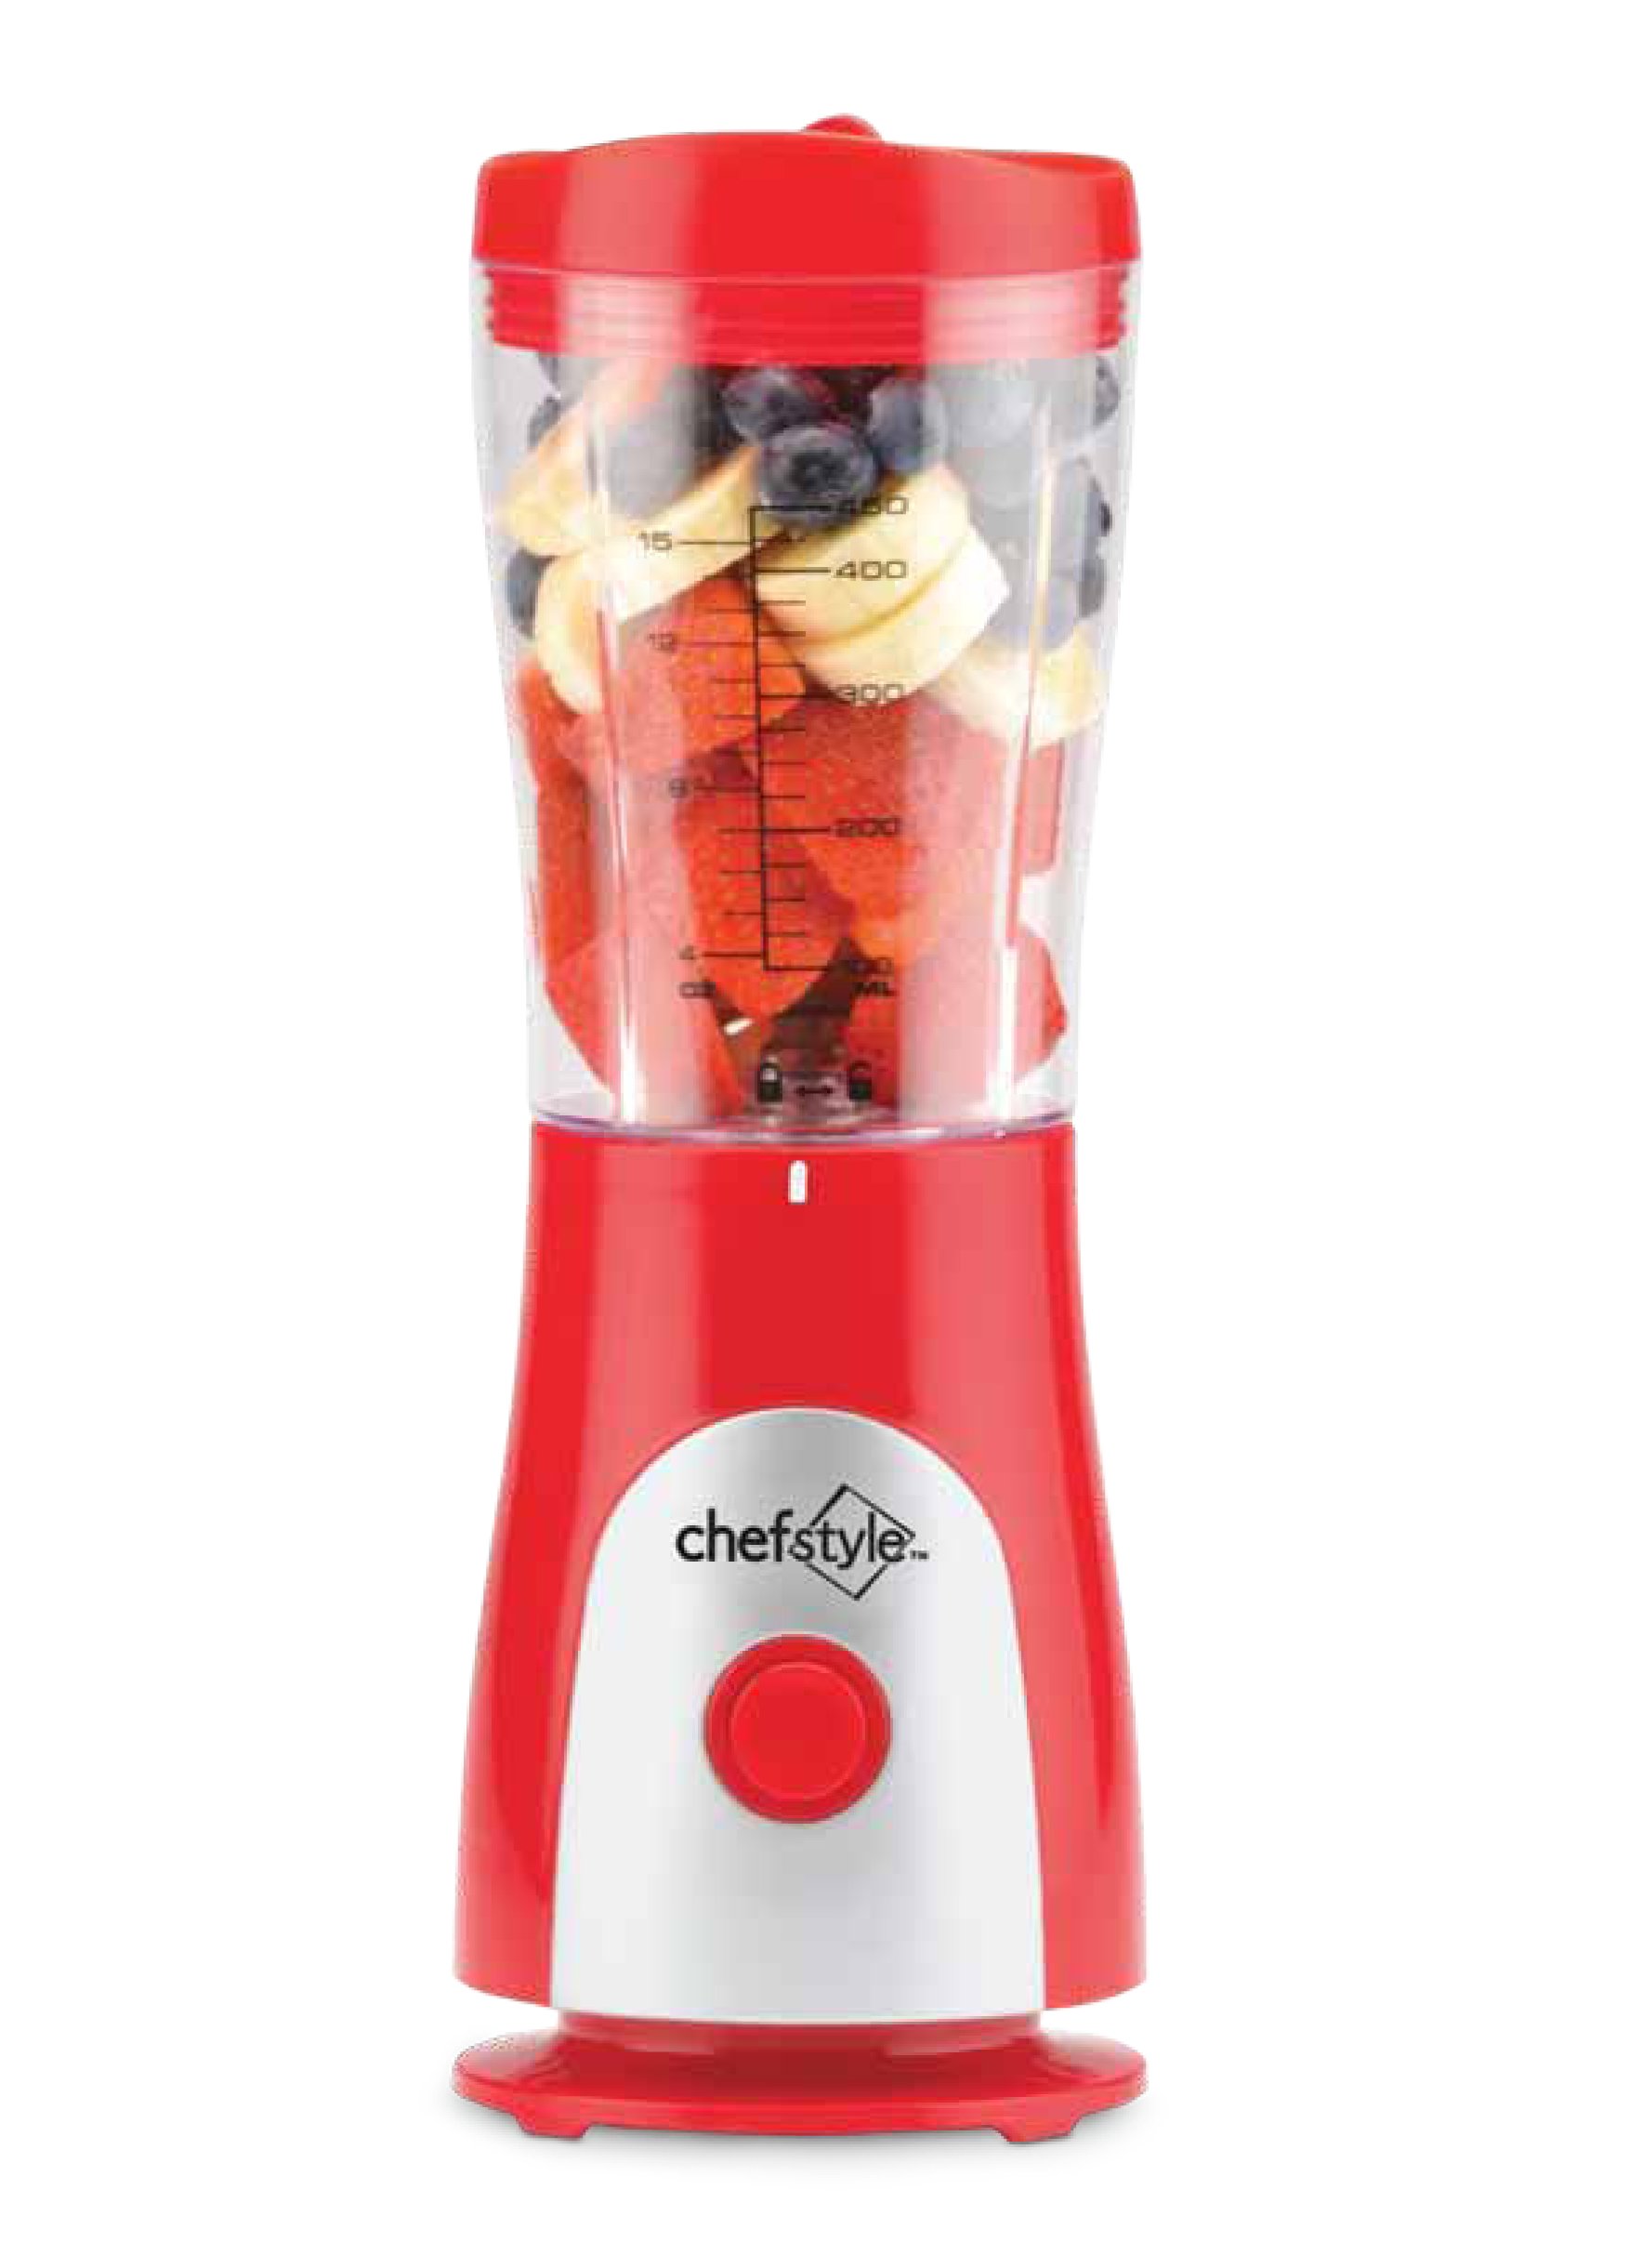 chefstyle 15oz Personal Blender, Red - Shop Blenders & at H-E-B